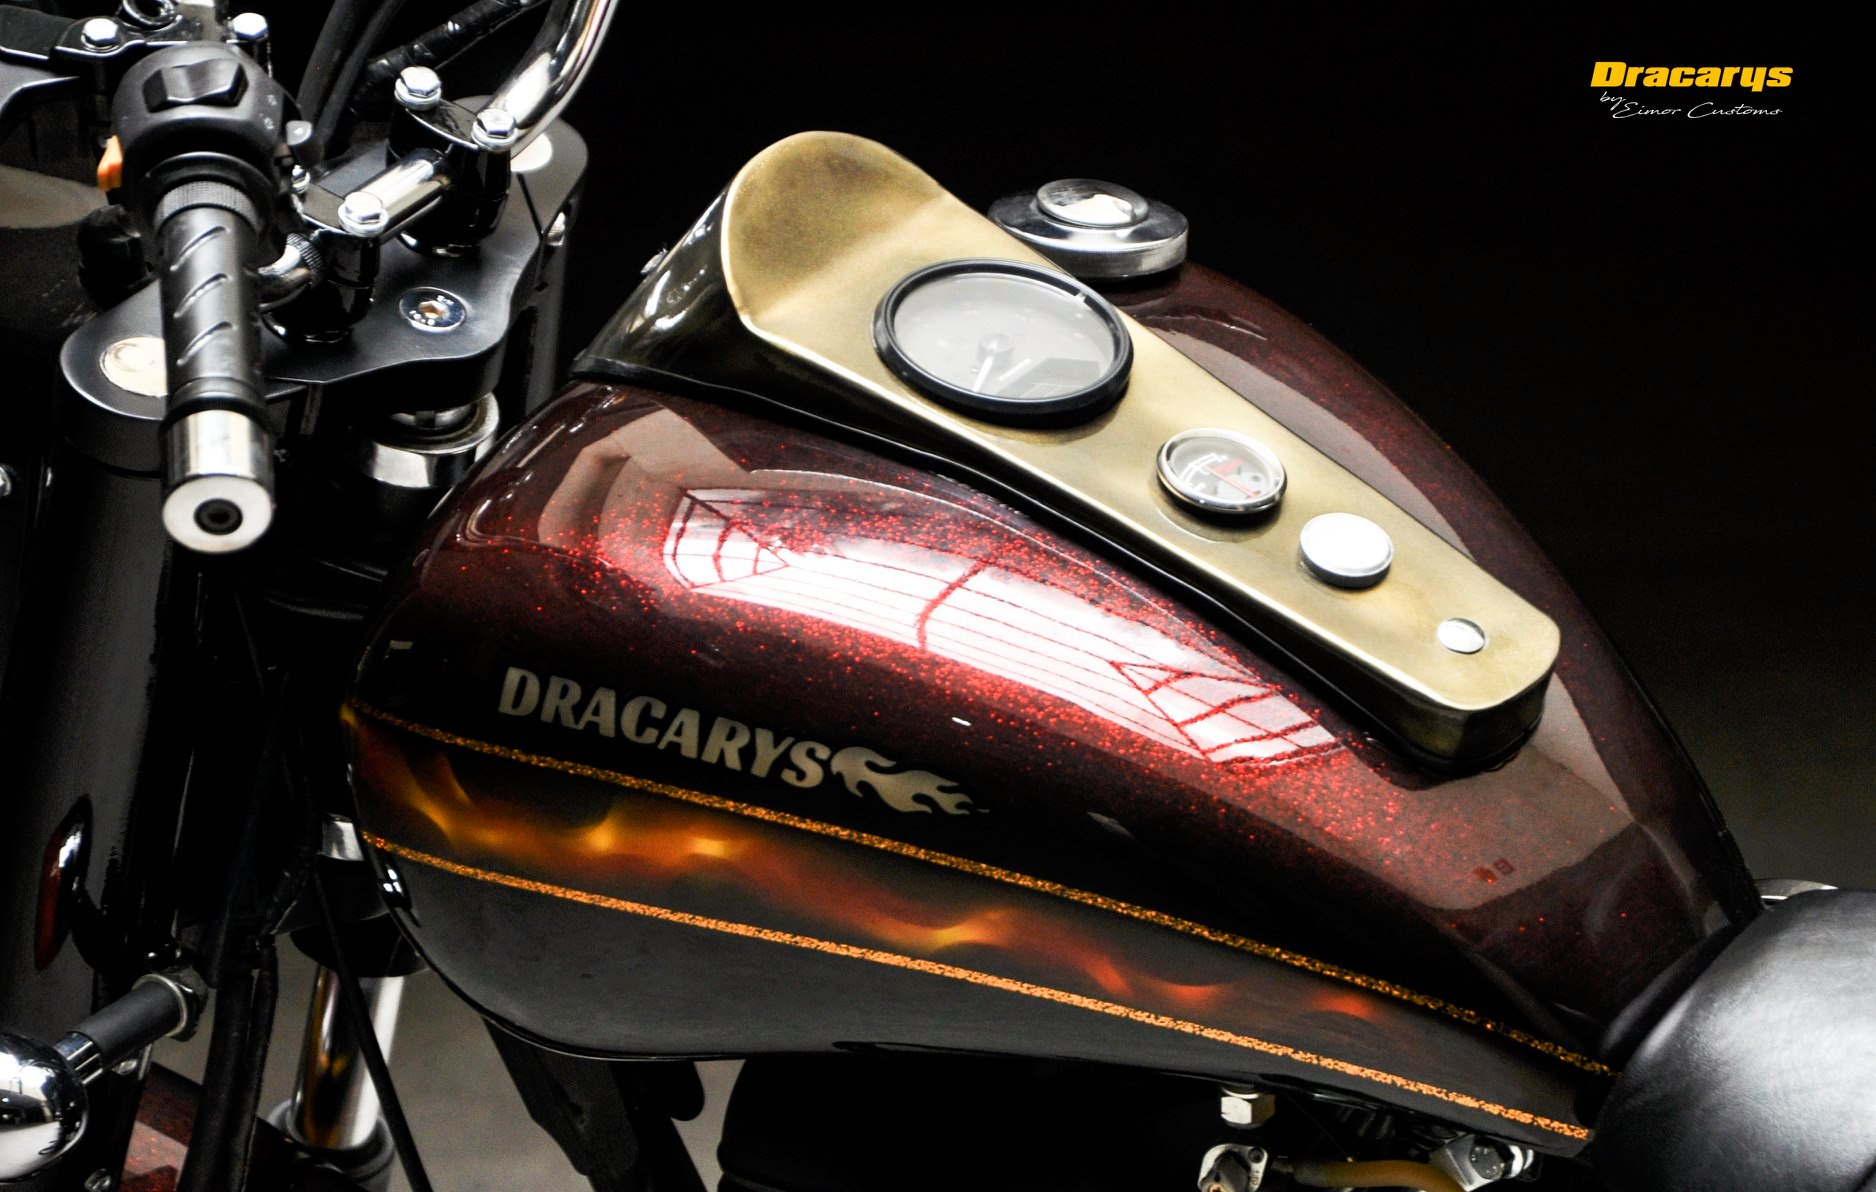 Royal Enfield Bullet 'Dracarys' Special Edition Details and Photos - photo